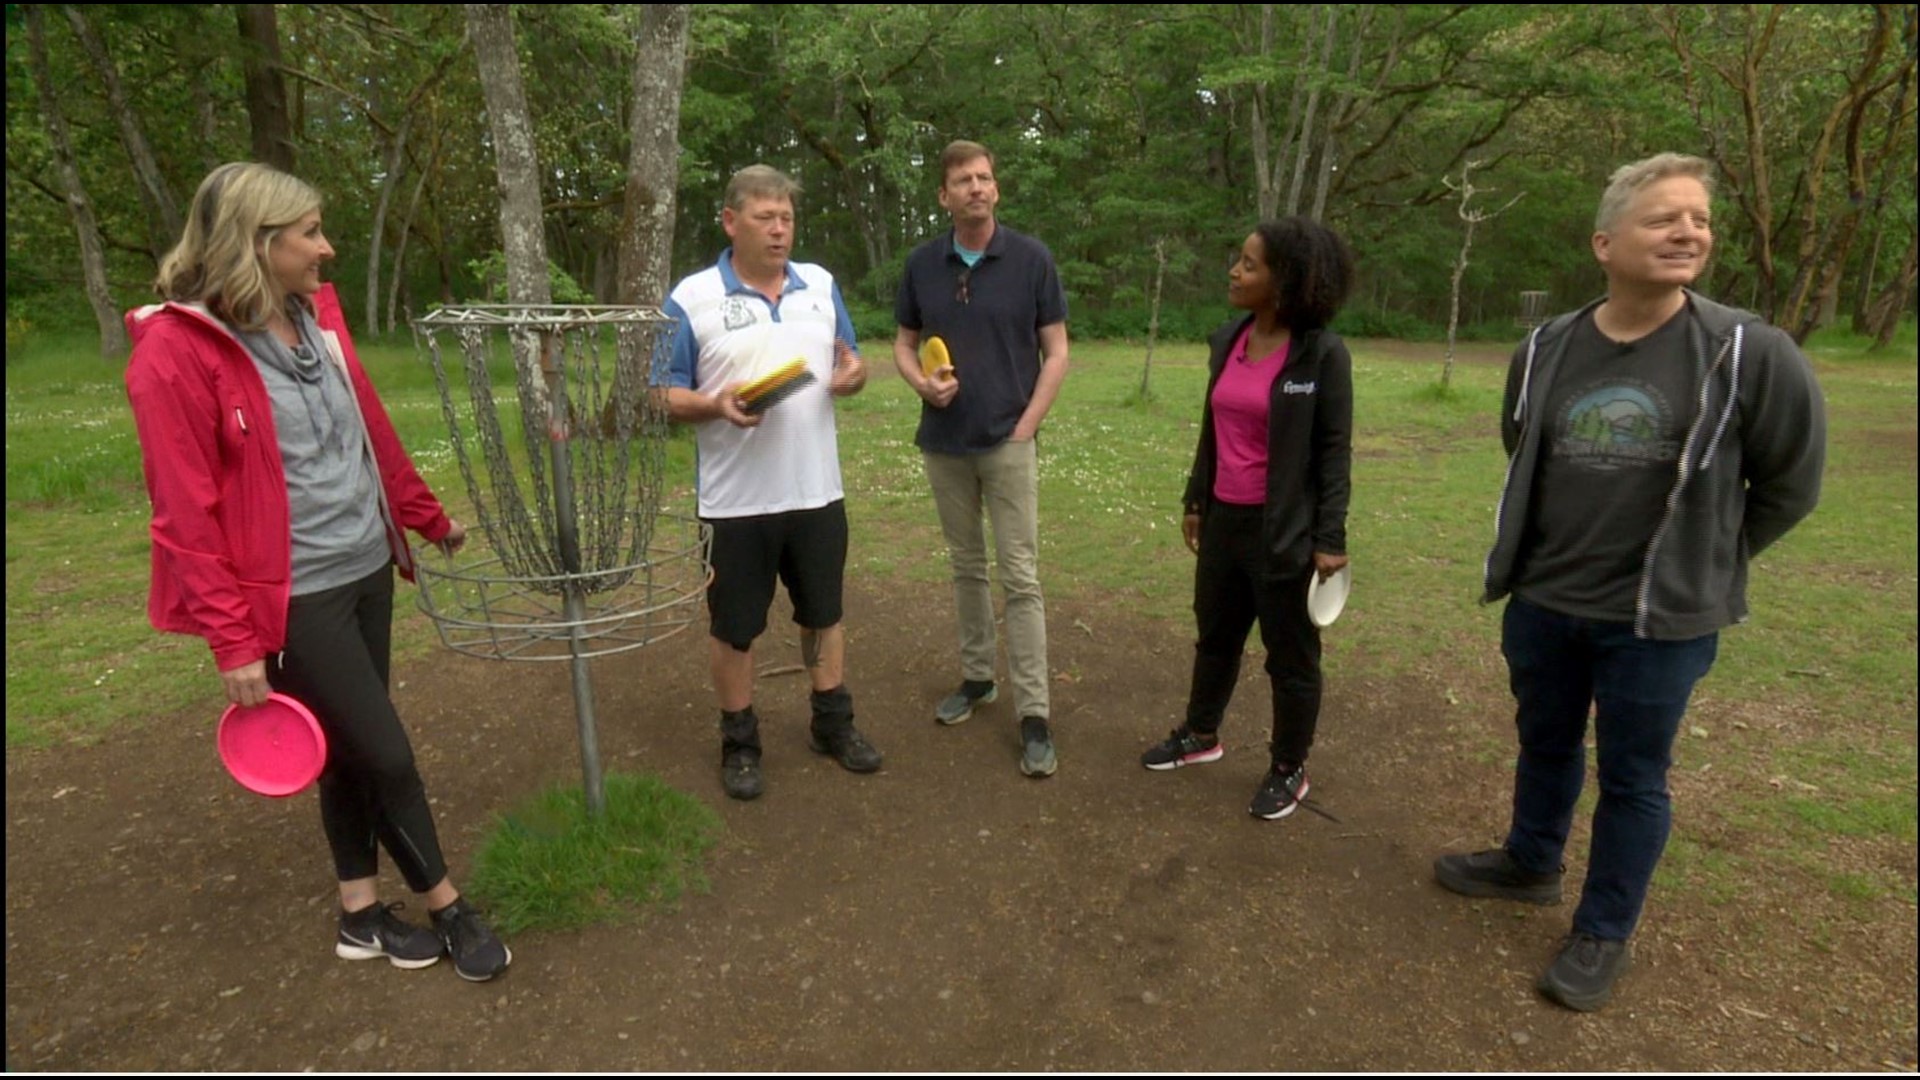 Watch Team Evening try out the growing sport at Fort Steilacoom Disc Park in Lakewood! #k5evening